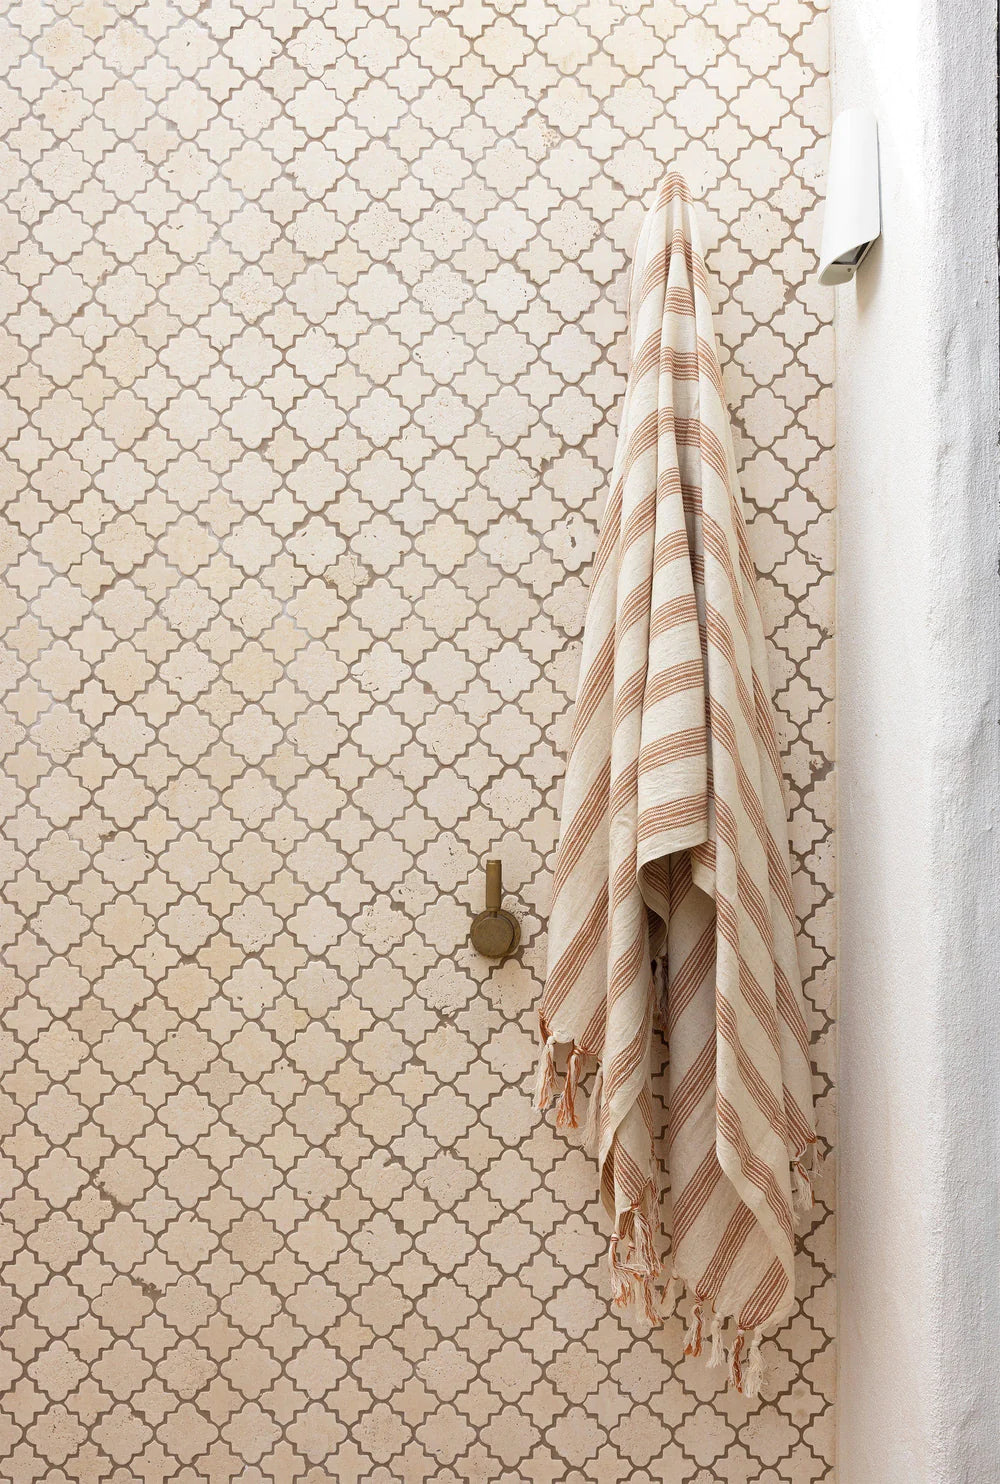 Nazire Turkish Towel/Throw - 2 colours